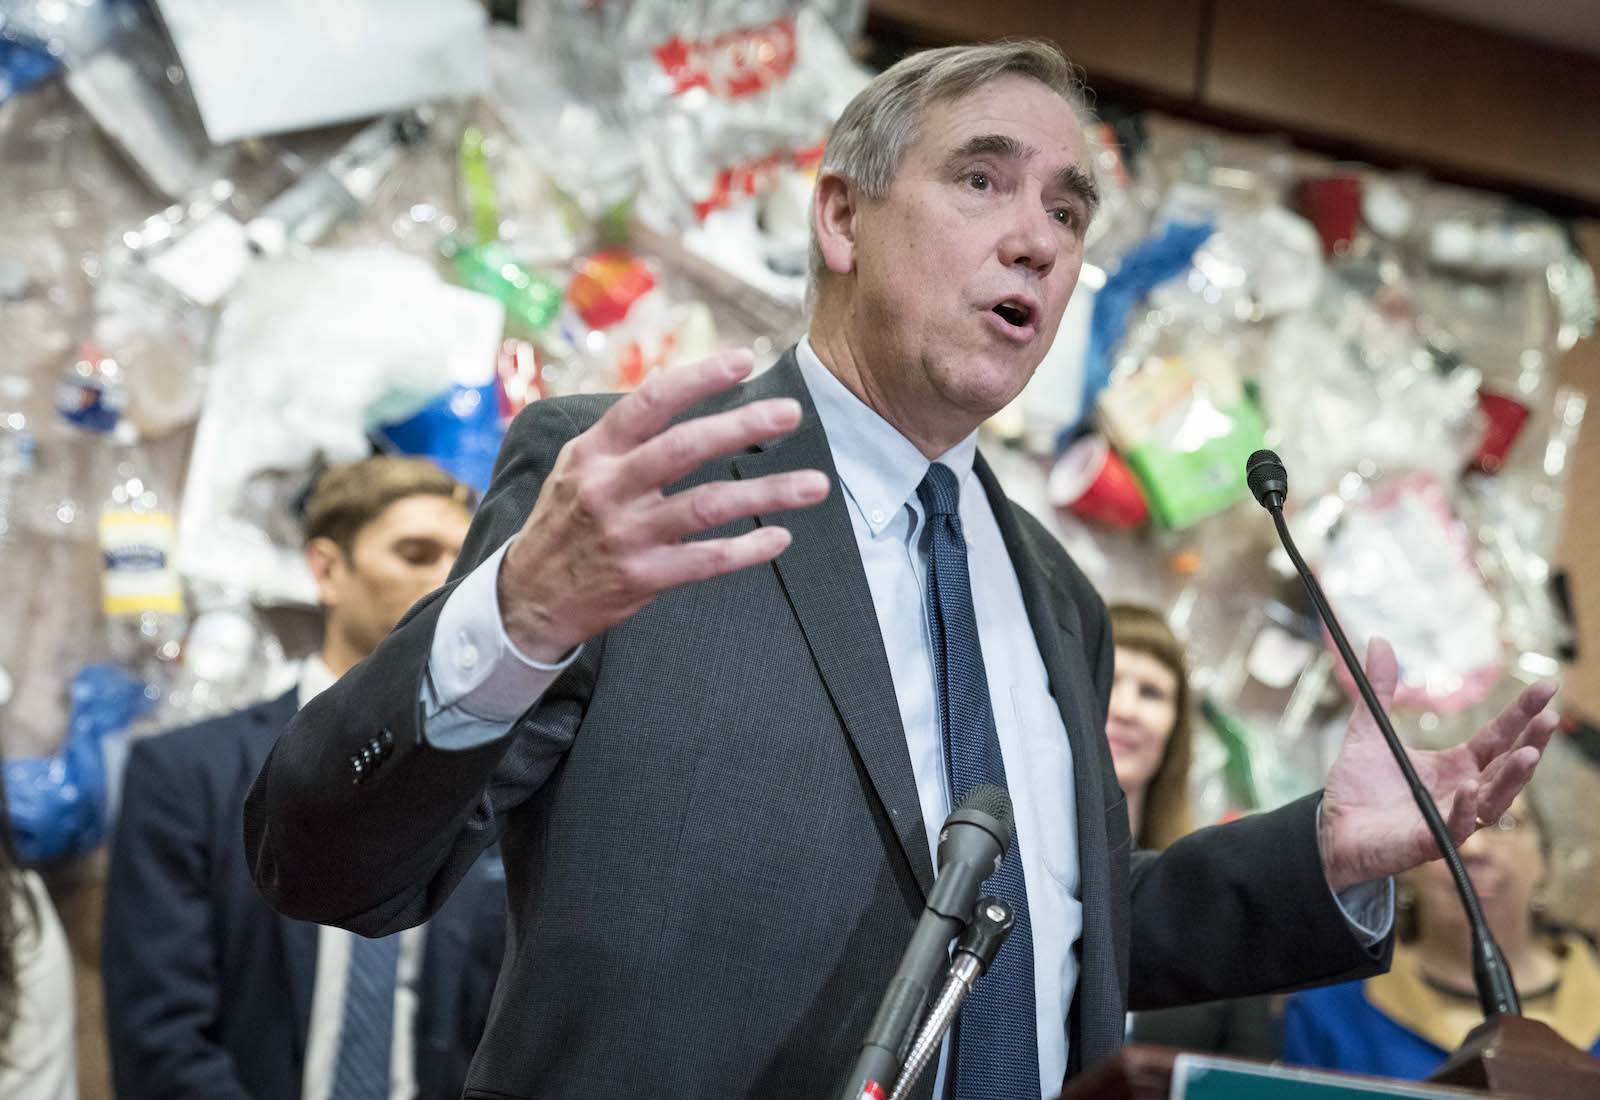 Sen. Jeff Merkley speaks at a podium with plastic trash in the background